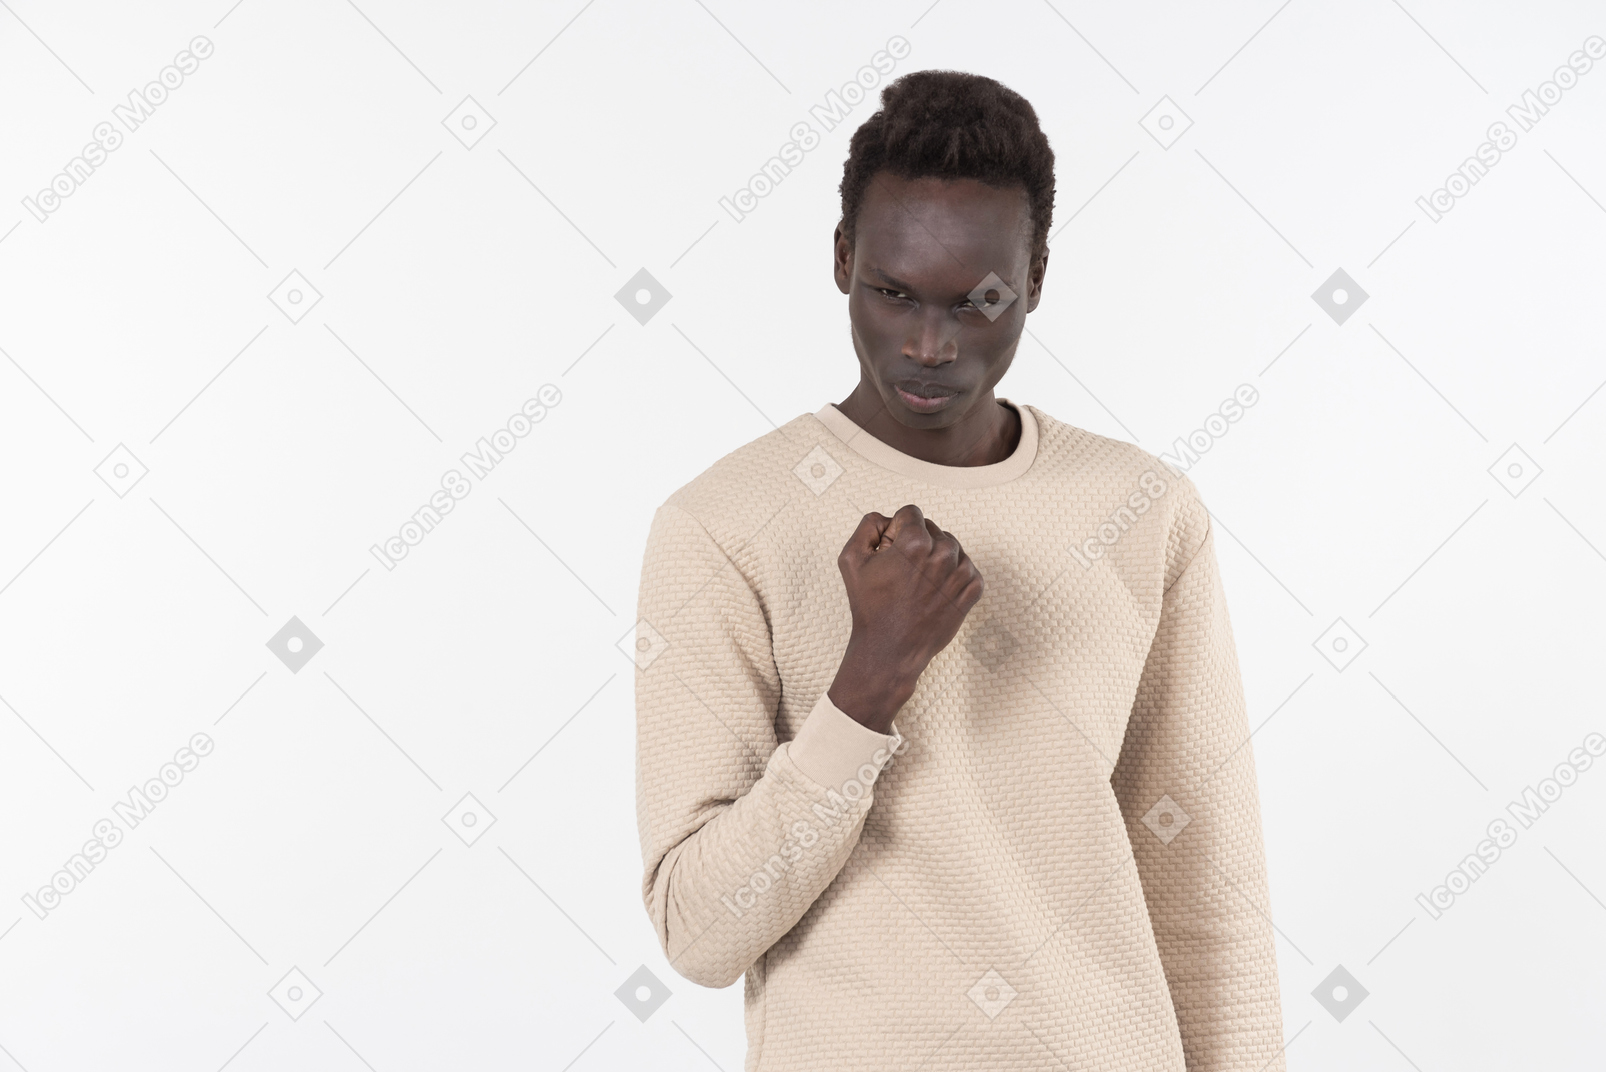 A young black man in a grey sweater standing alone on the white background